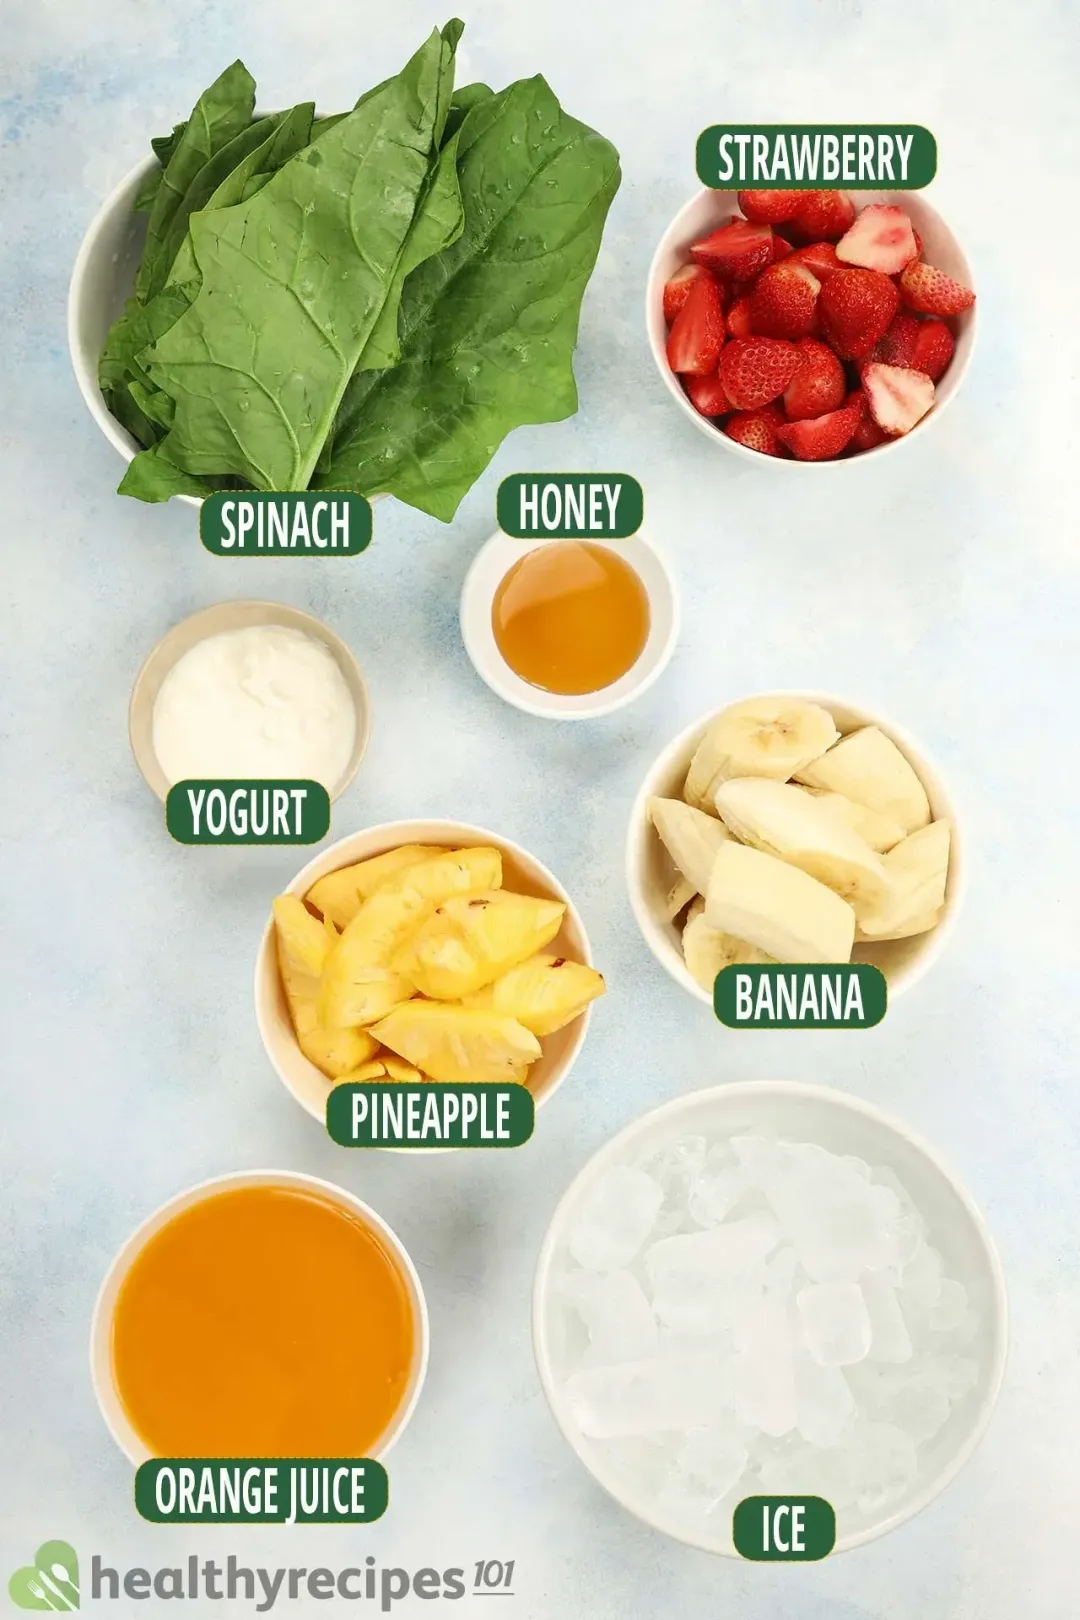 Ingredients for banana pineapple Smoothie